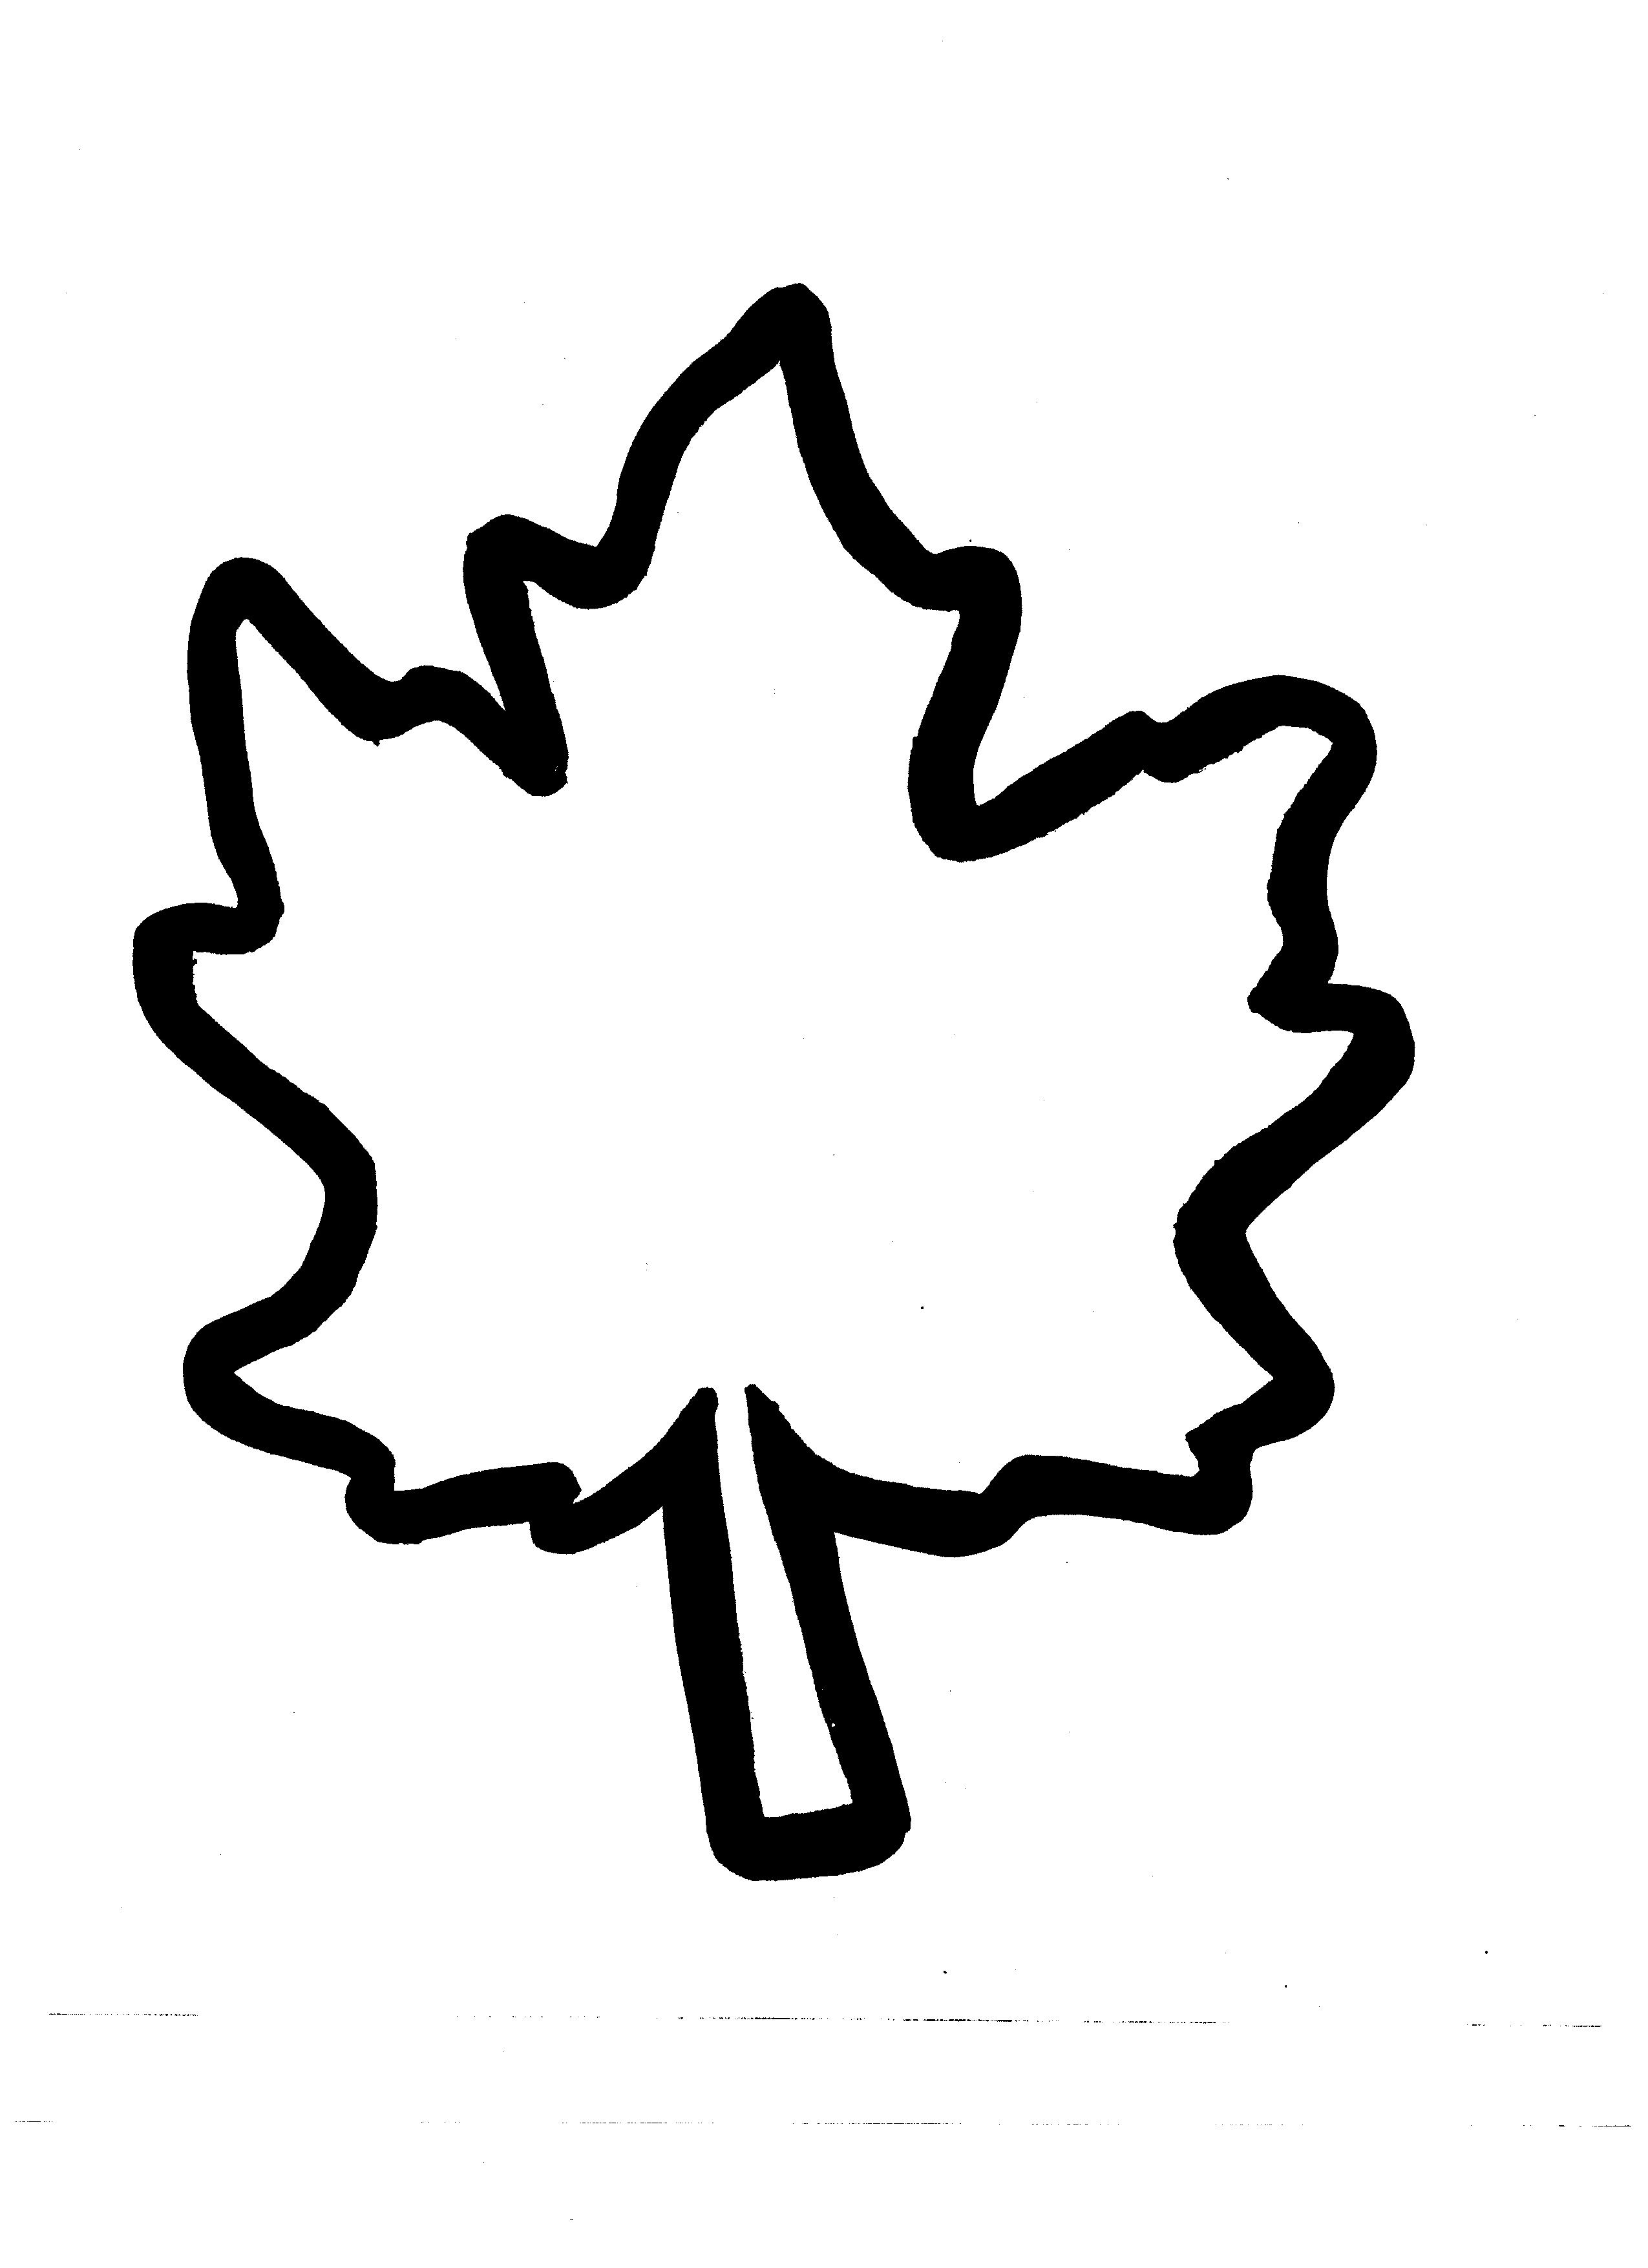 Fall leaves outline clipart